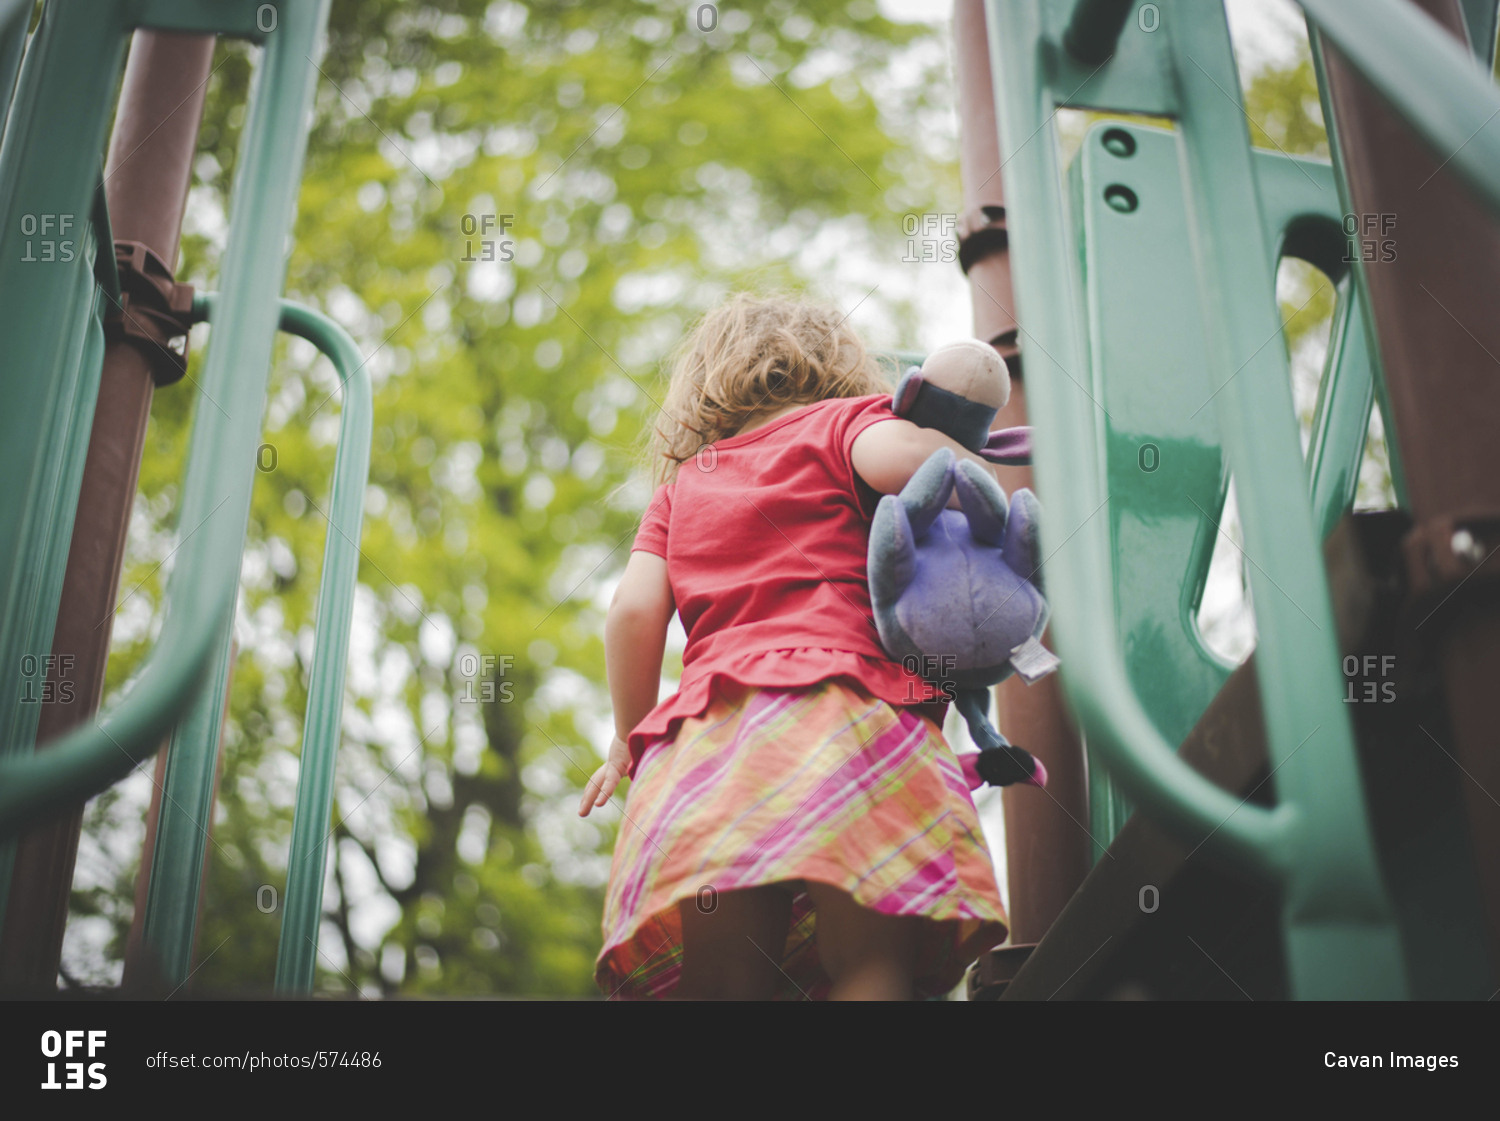 Low angle view of girl with stuffed toy standing on outdoor play equipment